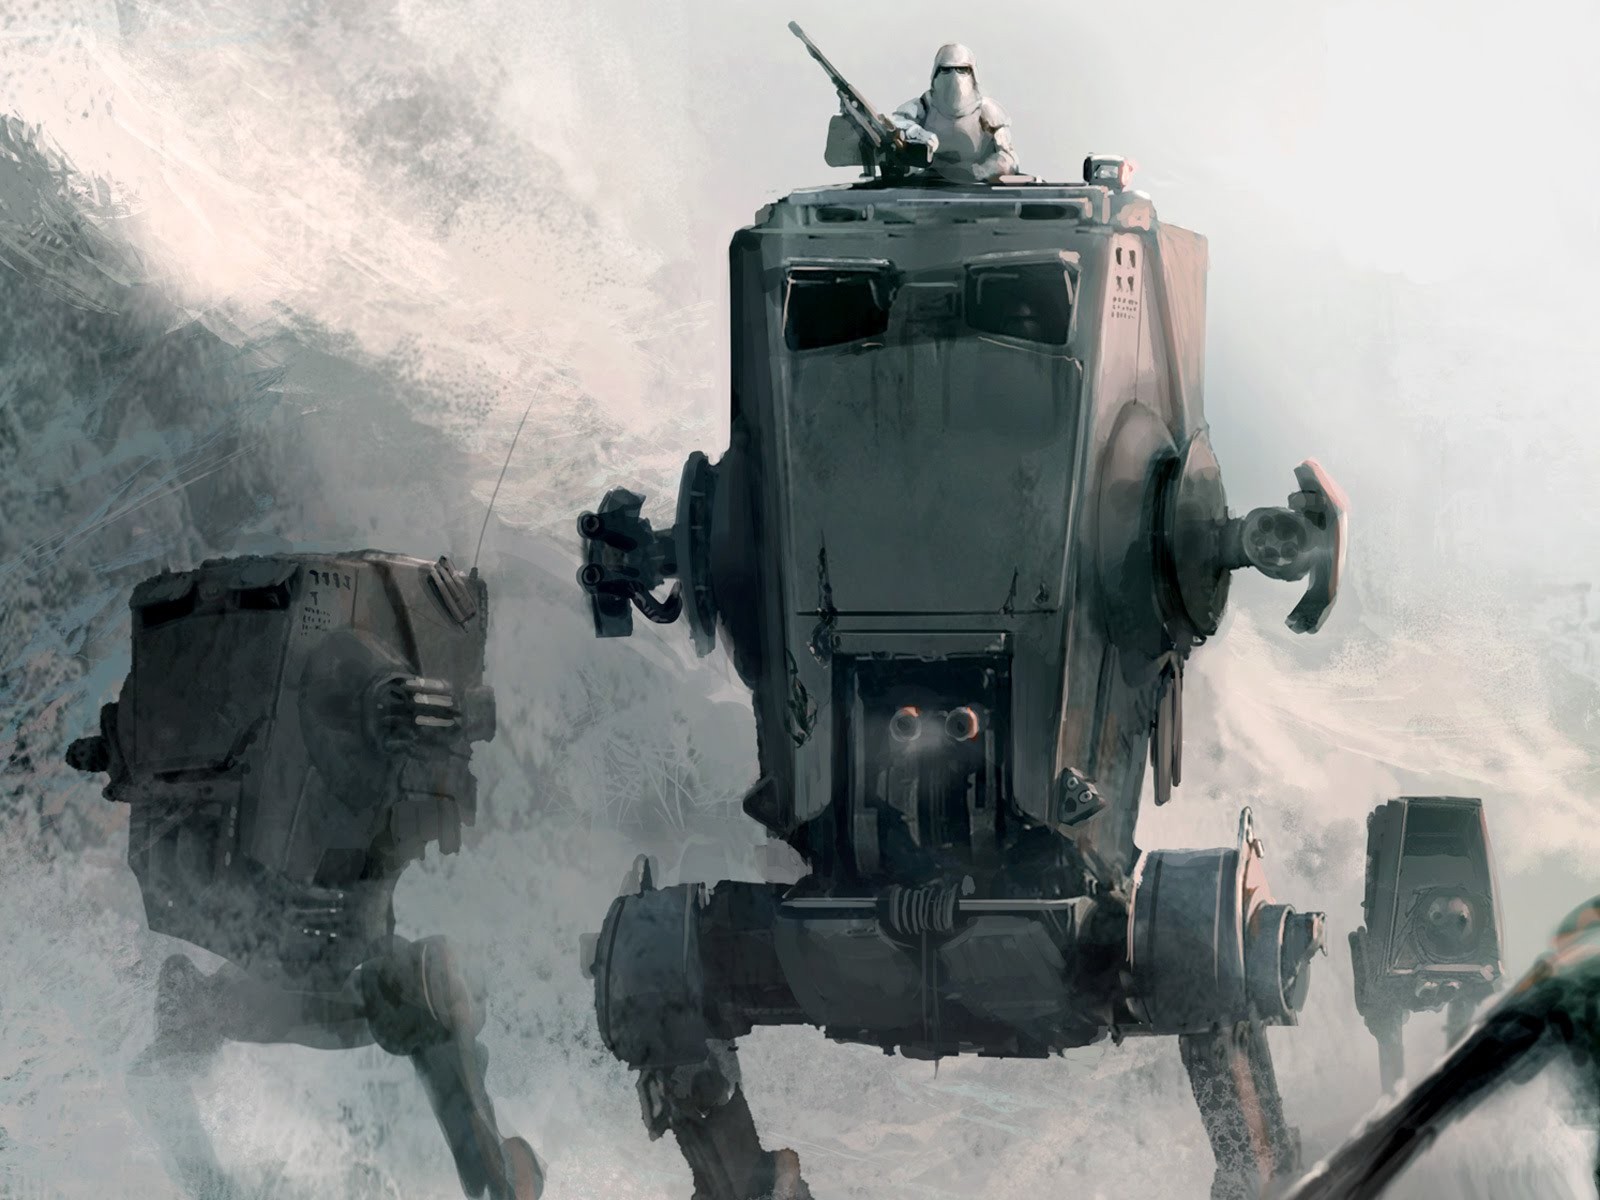 General 1600x1200 Star Wars war AT-ST artwork Snow Trooper Imperial Forces science fiction vehicle